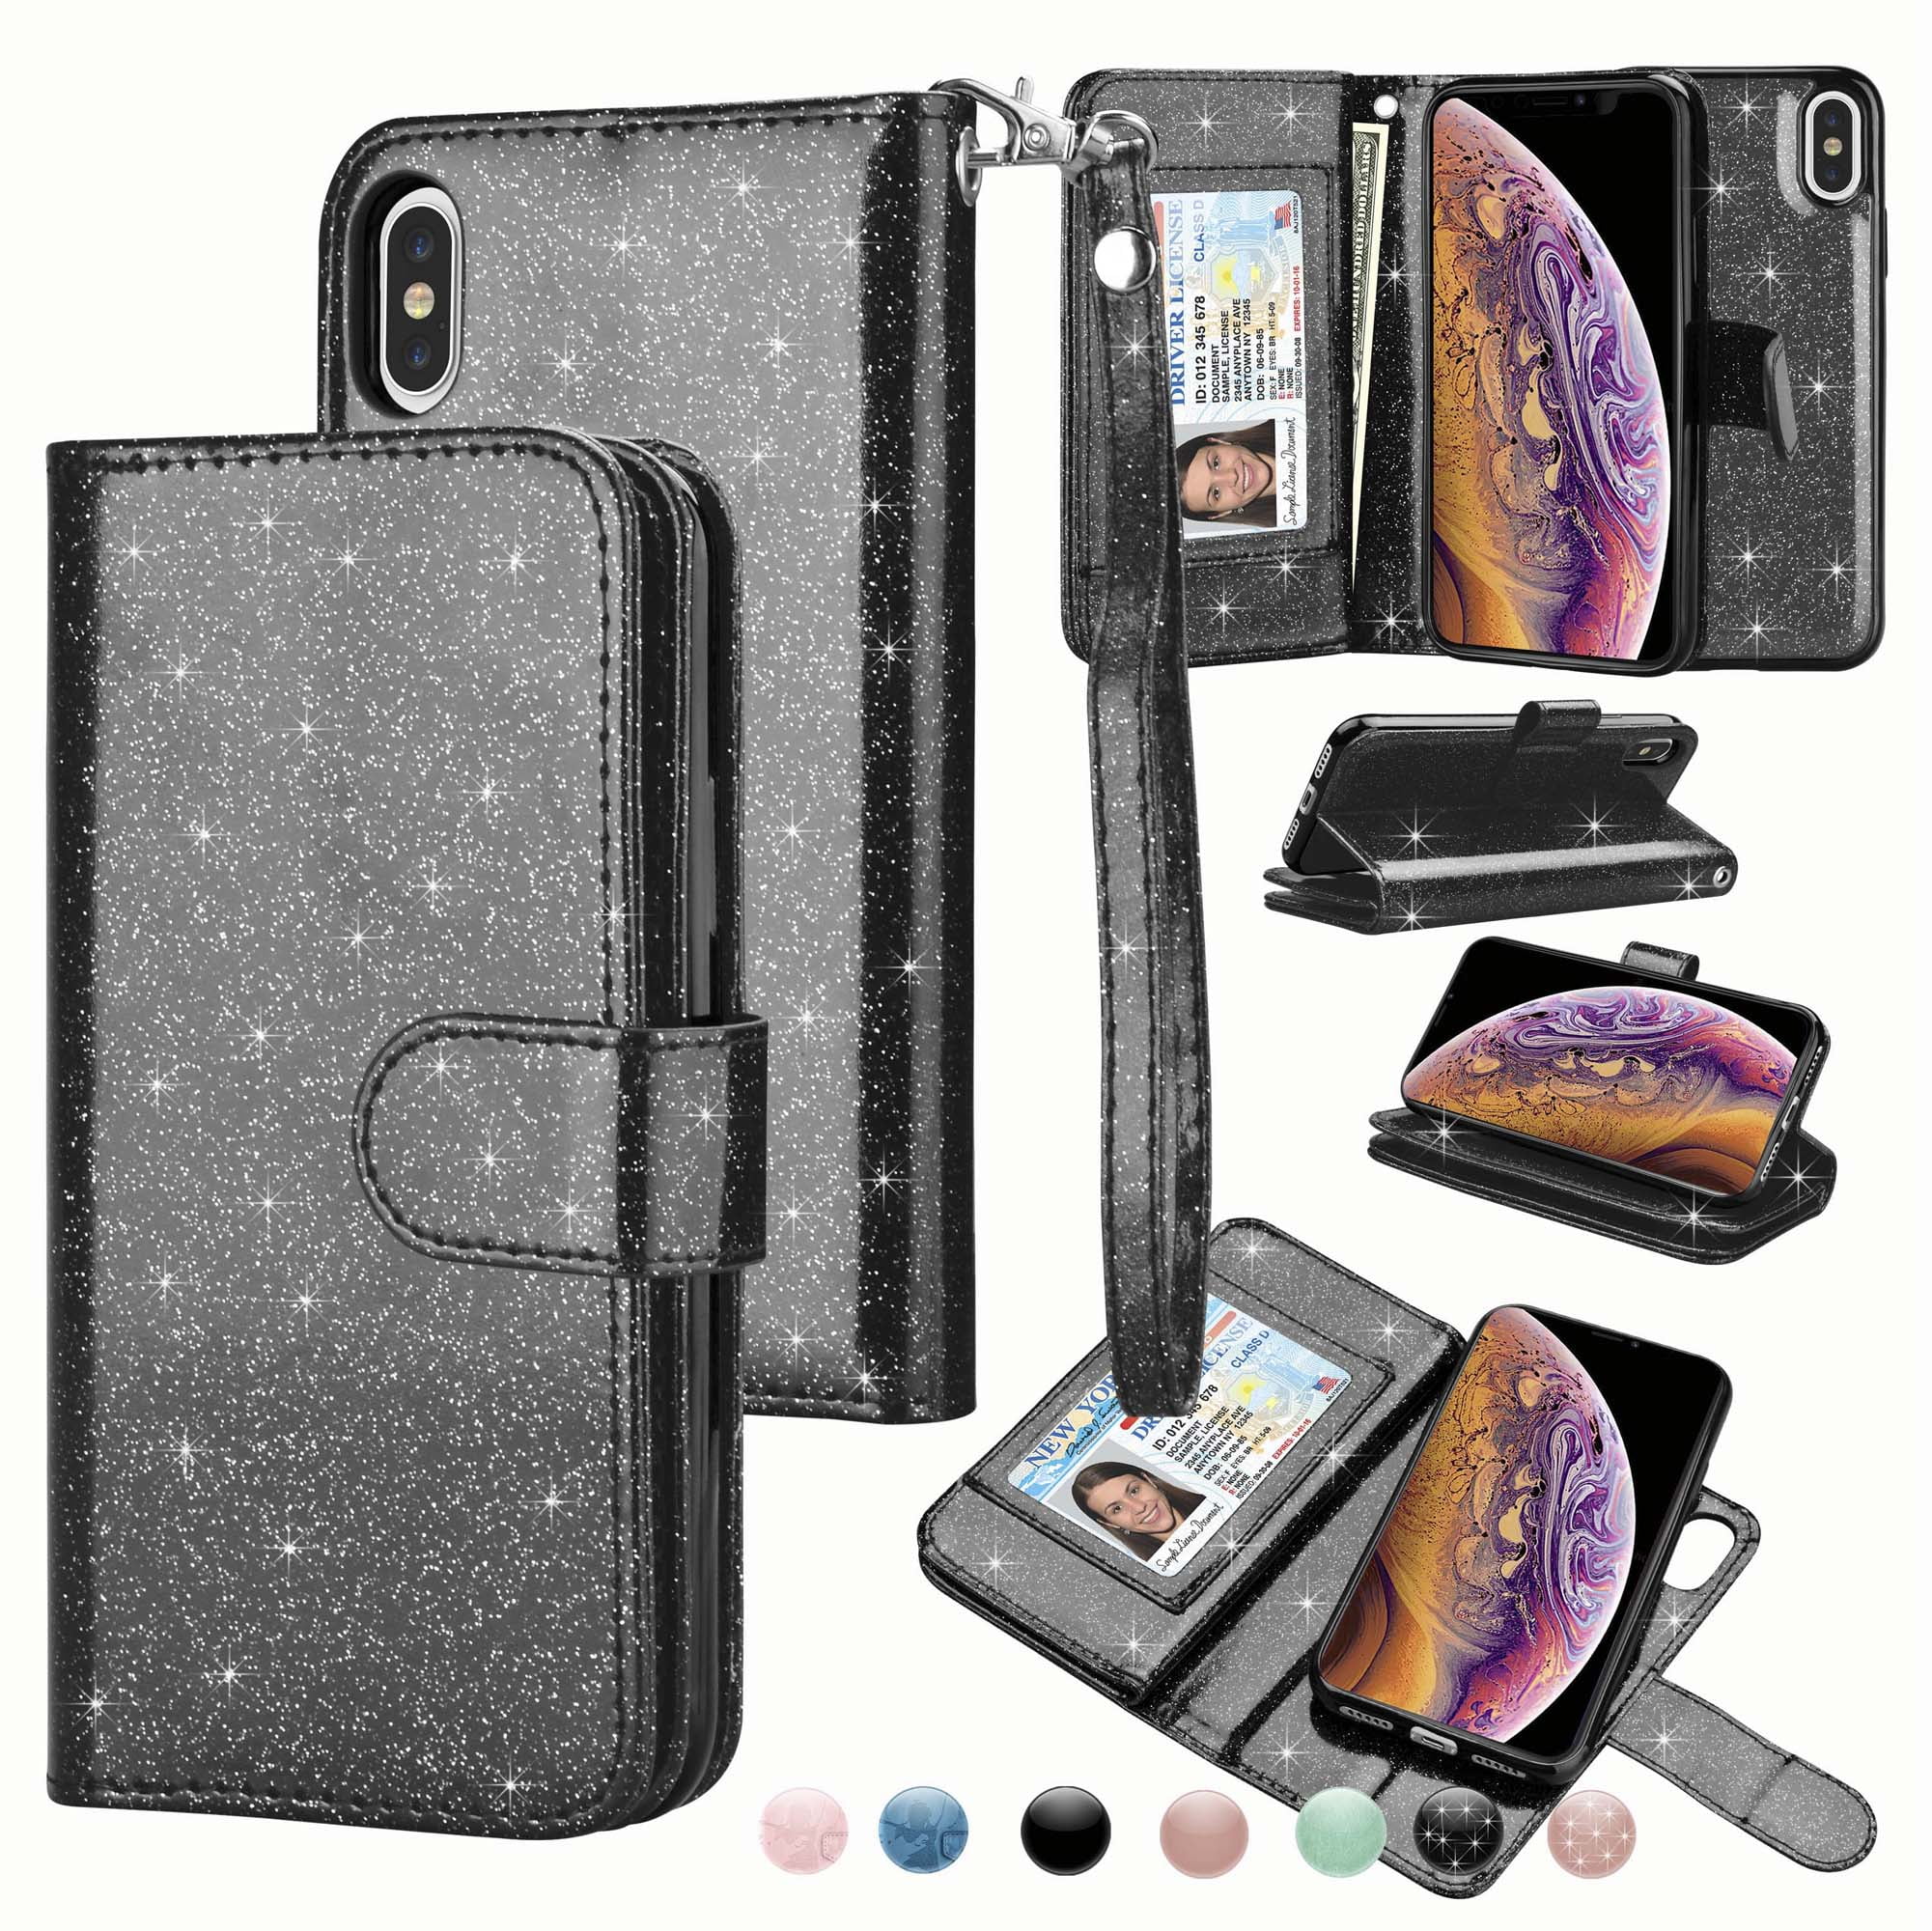 Twin skull envelope leather wallet handmade phone wallet case cover for iPhone X XS XR XS Max iPhone 8 7 6 6s Plus Samsung Galaxy S7 Edge Galaxy S8 S9 S10 Plus Note 8 Note 9 MN0034